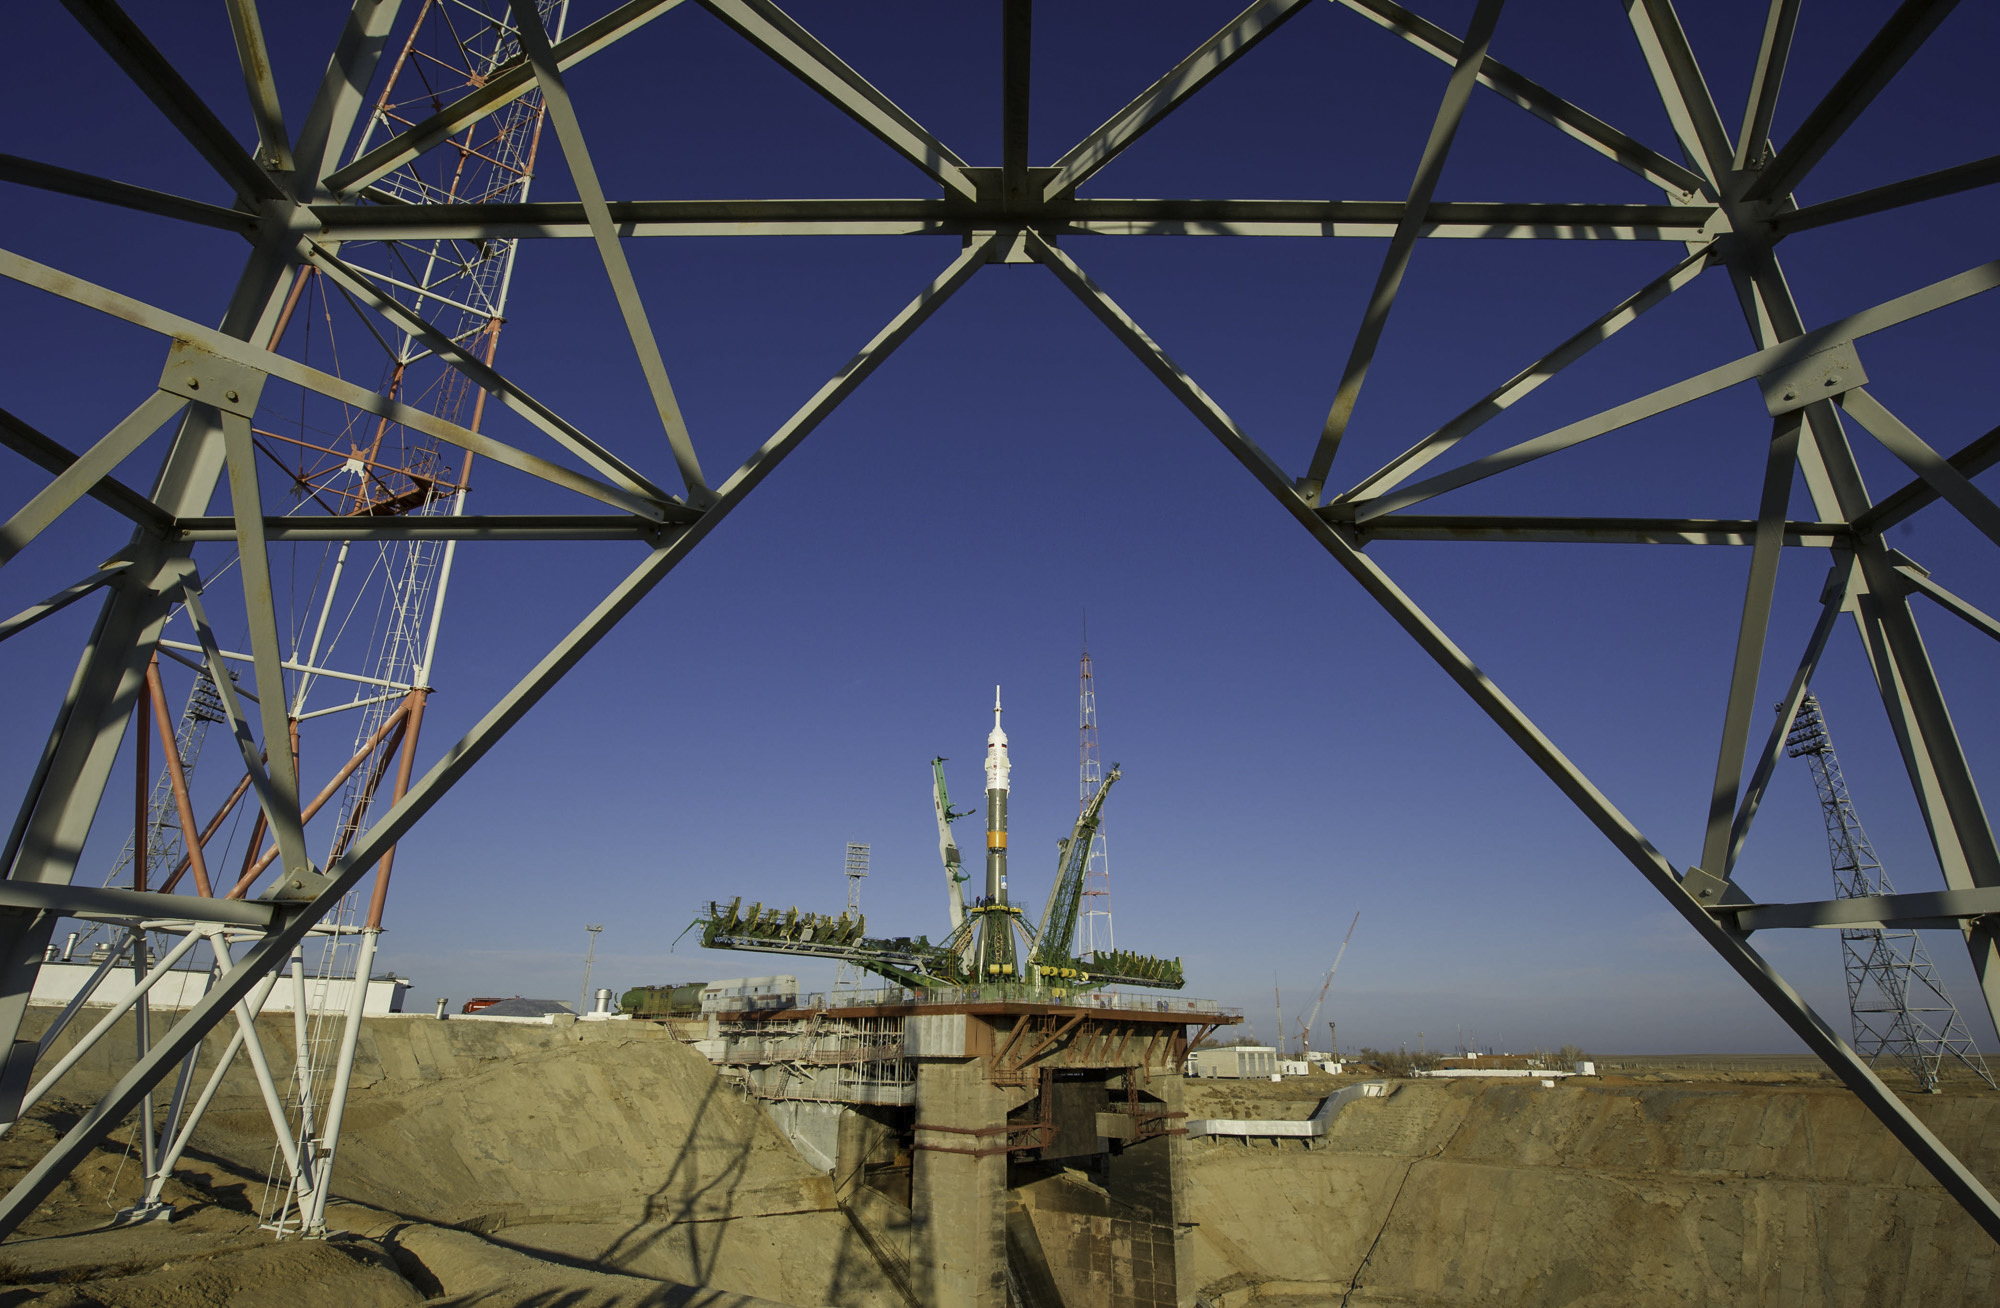  The Soyuz TMA-22 spacecraft is seen at the launch pad after being raised into vertical position on Friday, Nov. 11, 2011 at the Baikonur Cosmodrome in Kazakhstan. The launch of the Soyuz spacecraft with Expedition 29 Soyuz Commander Anton Shkaplerov